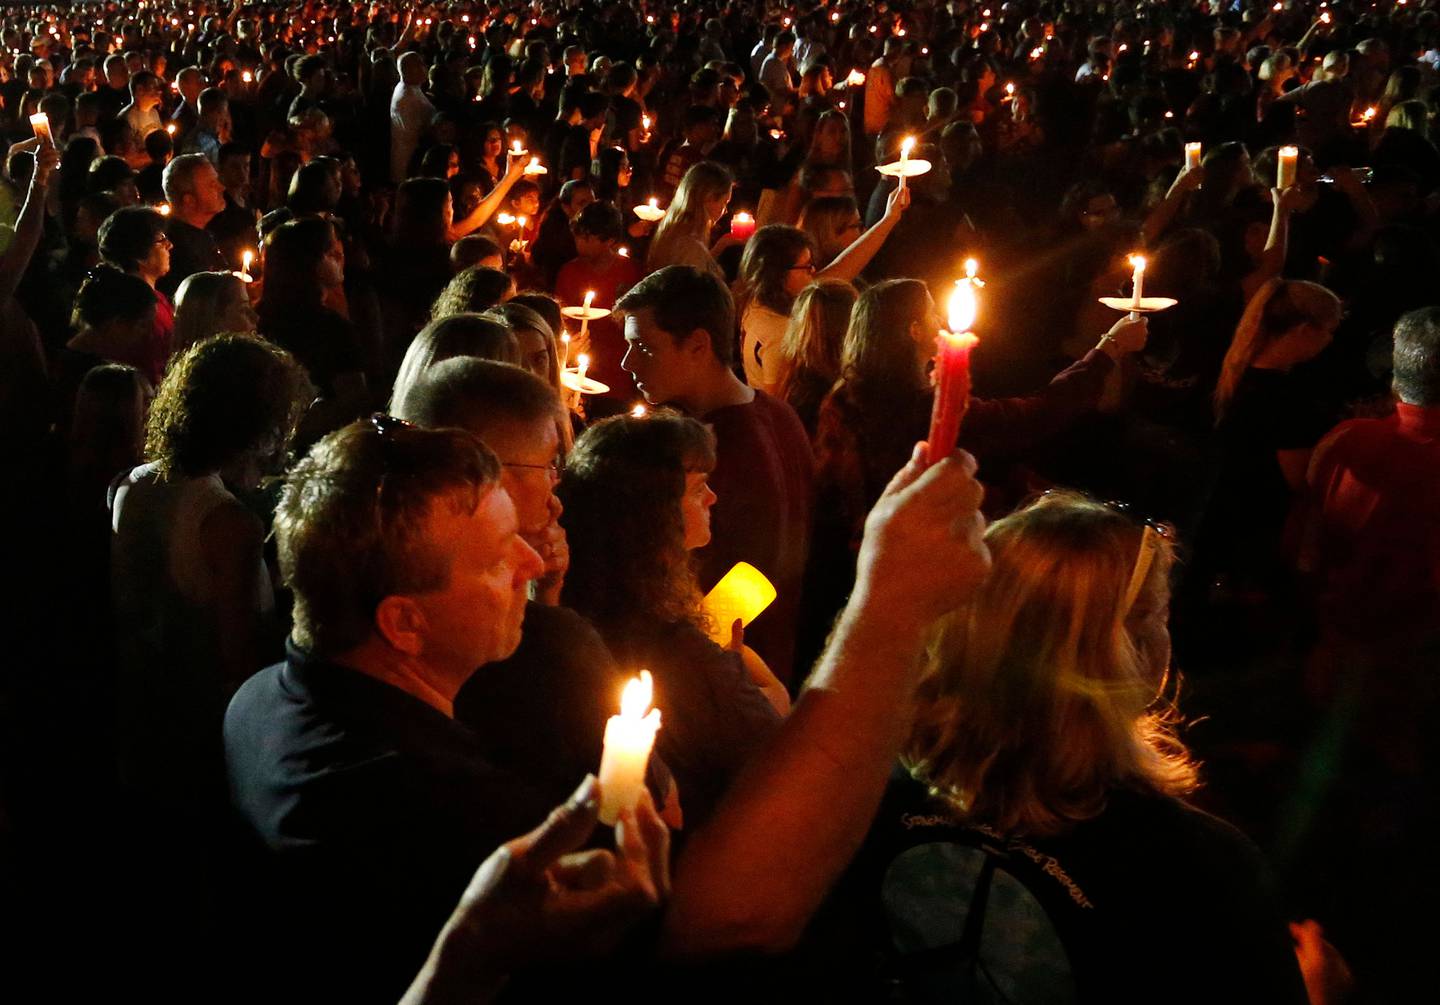 Thousands of mourners hold candles during a candlelight vigil for the victims of Marjory Stoneman Douglas High School shooting in Parkland, Florida on October 15, 2018. AFP